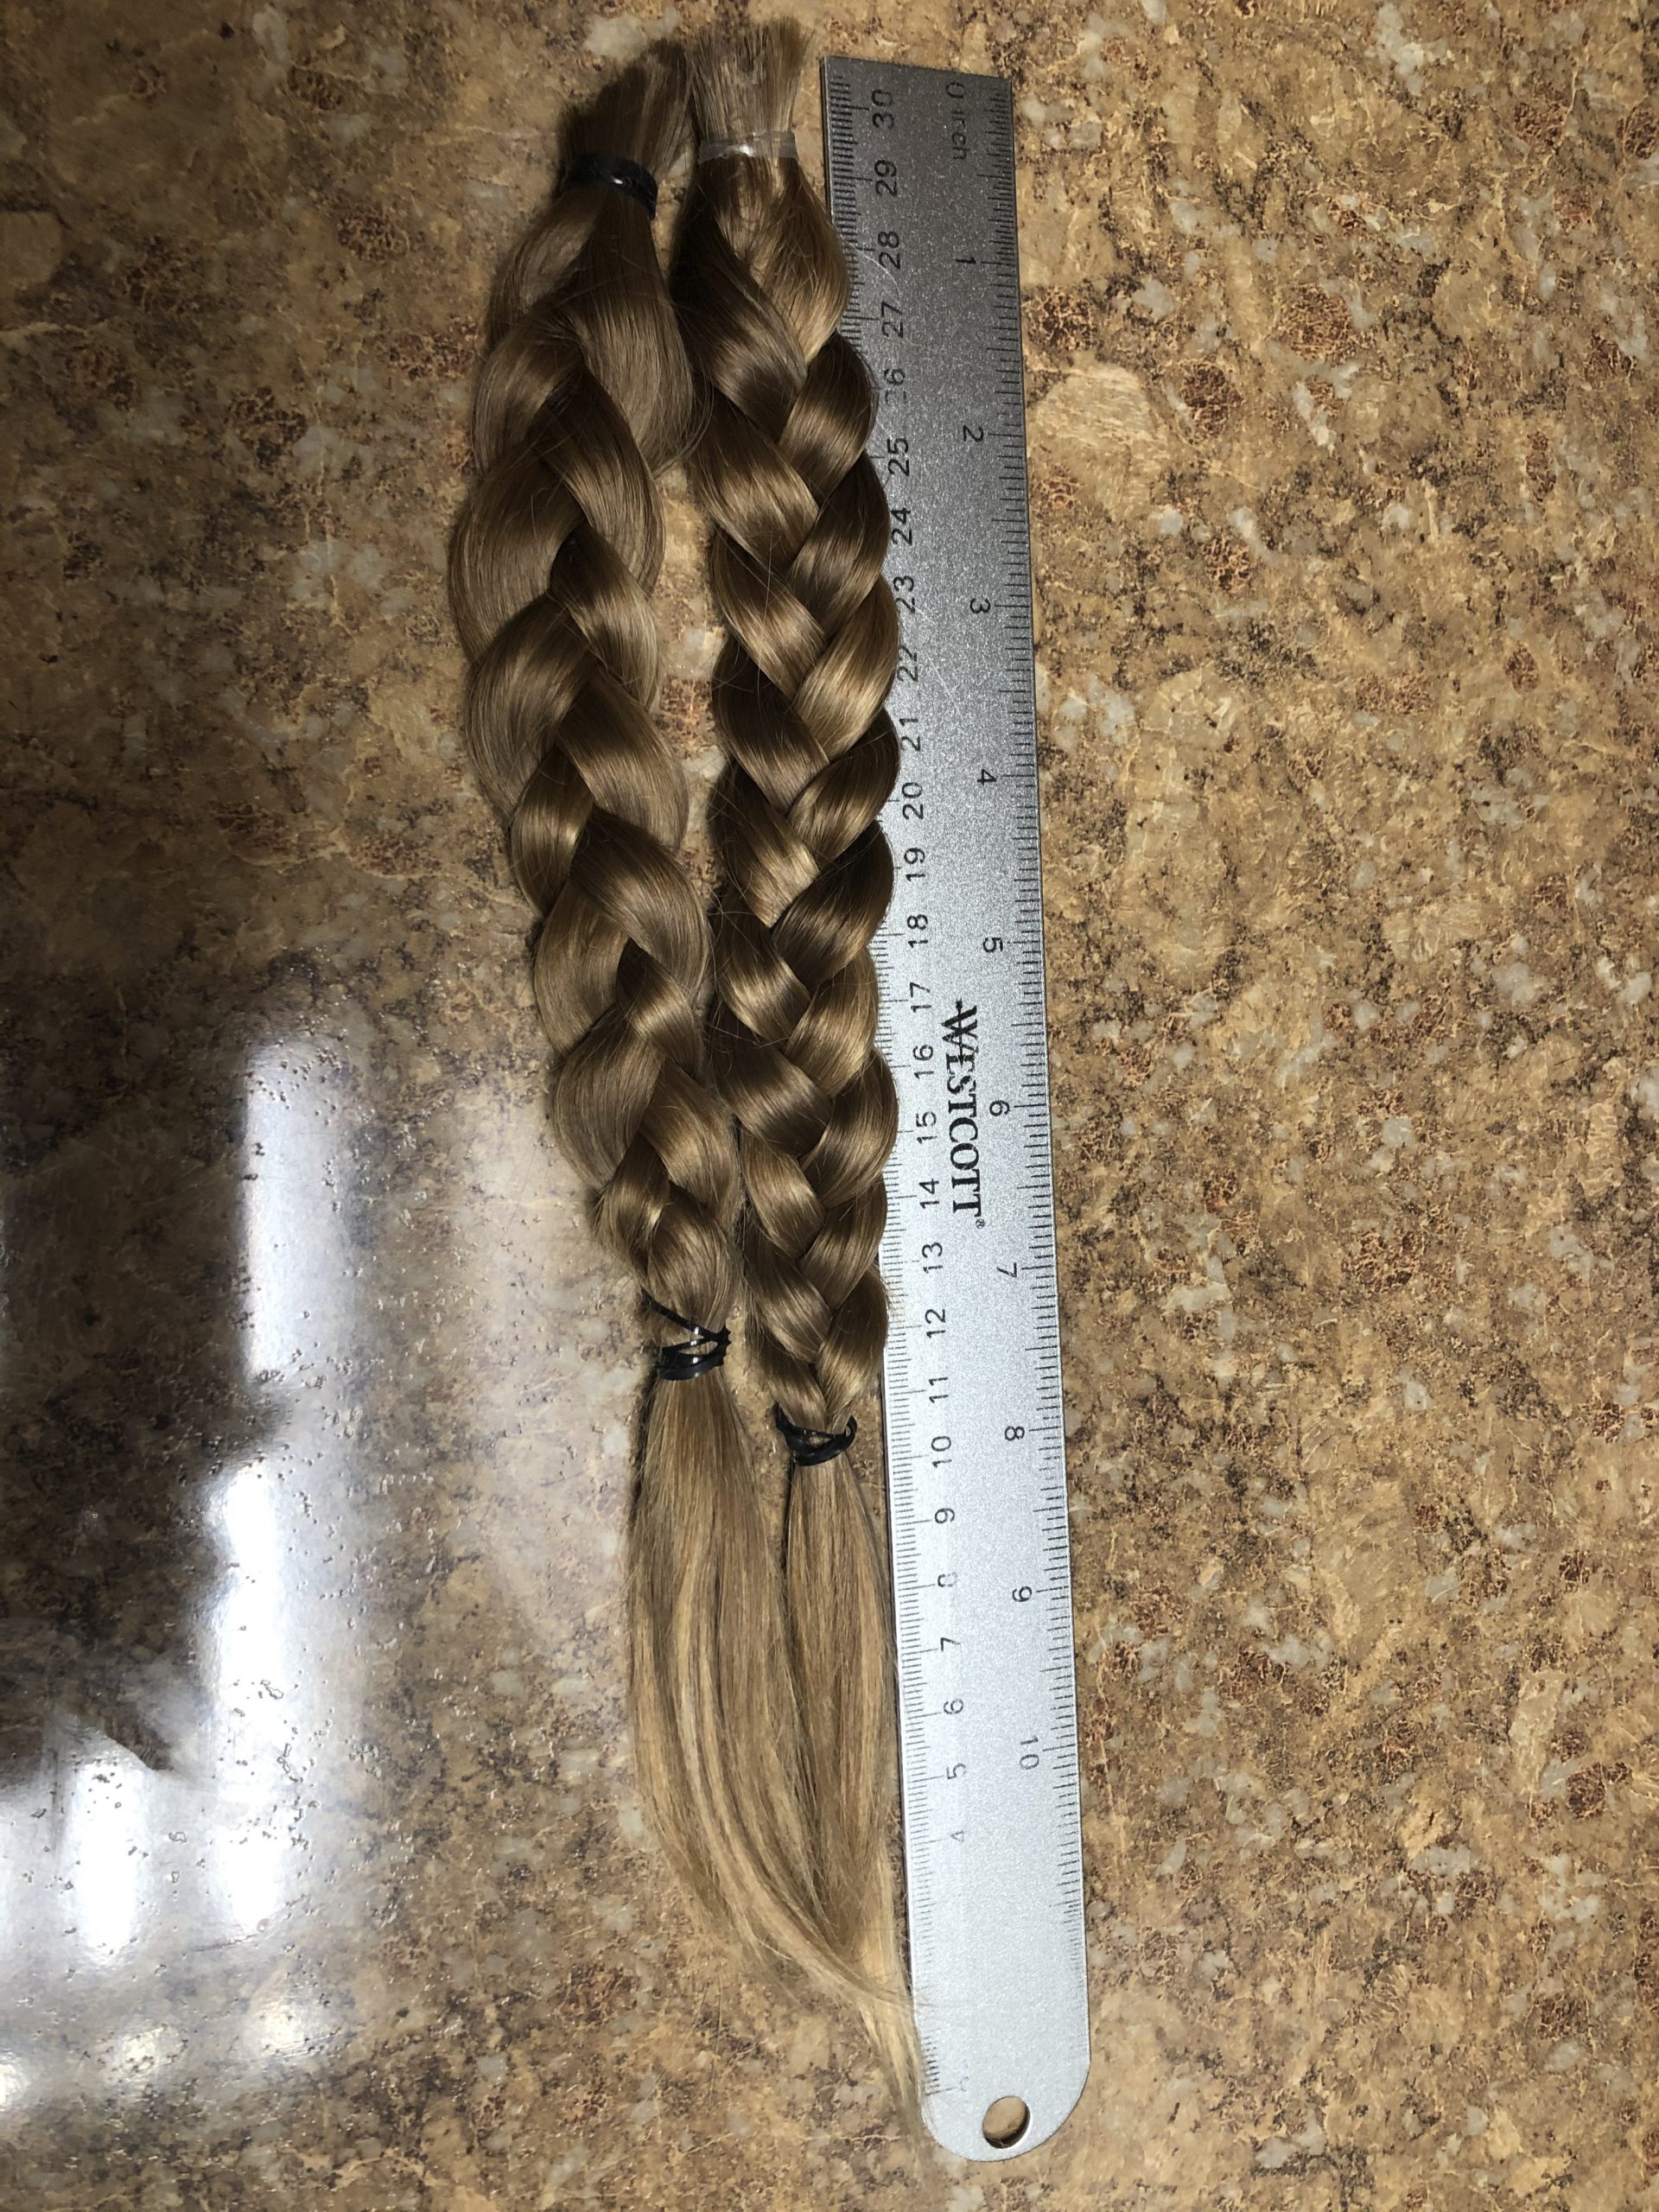 12 inches of heathly blonde hair